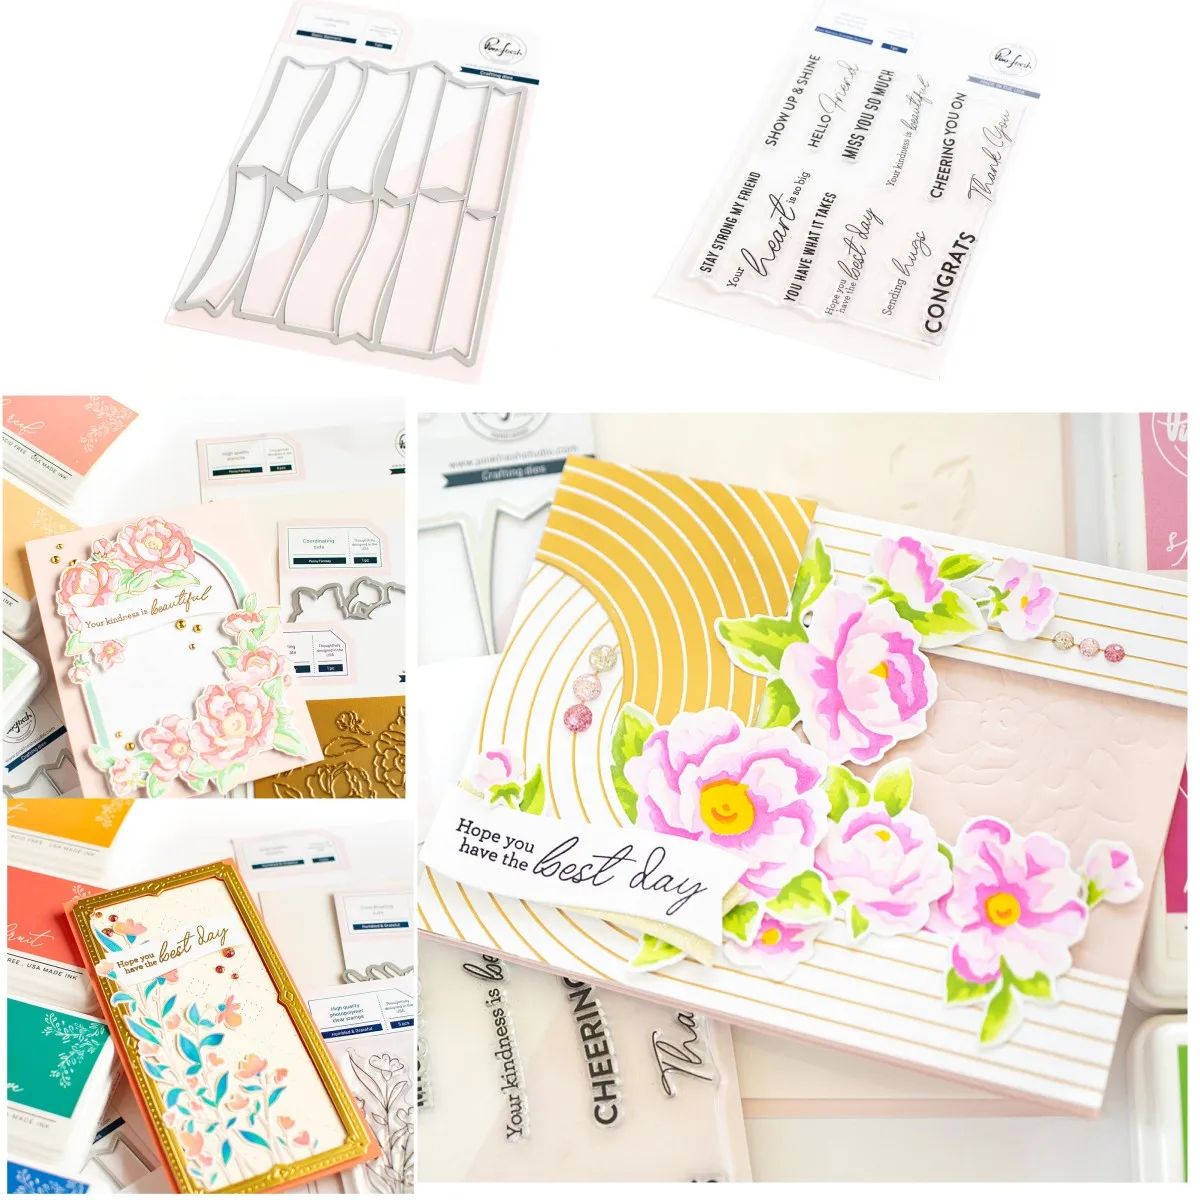 

New Flower Banners Everyday Metal Cutting Dies Clear Stamps Scrapbook Diary Decoration Embossing Template DIY Make Card Album